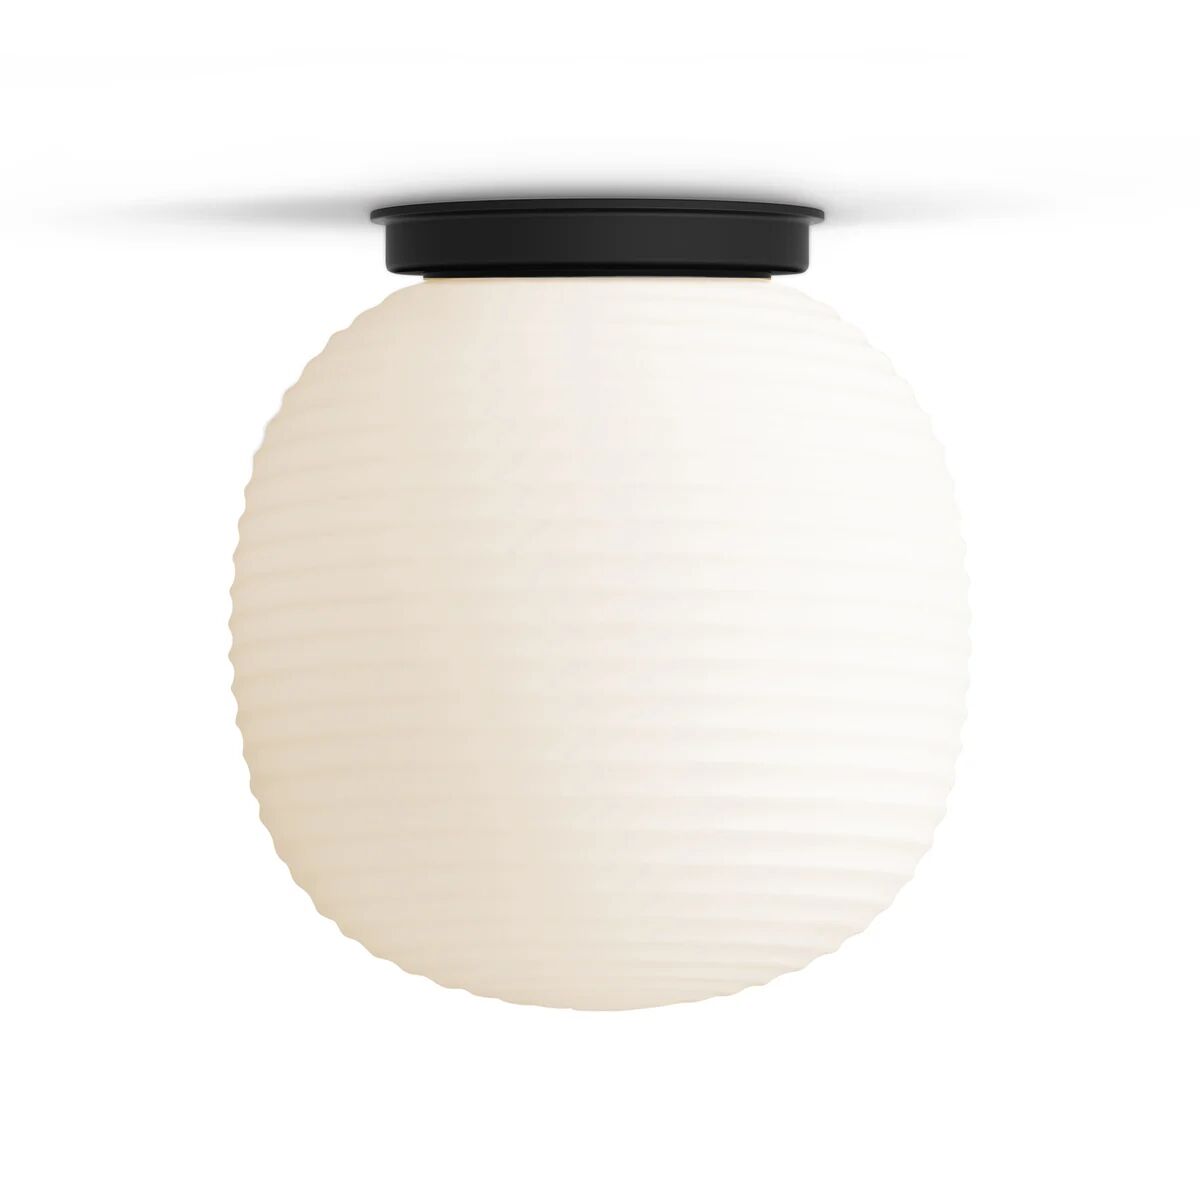 New Works Lantern taklampe medium Frosted white opal glass